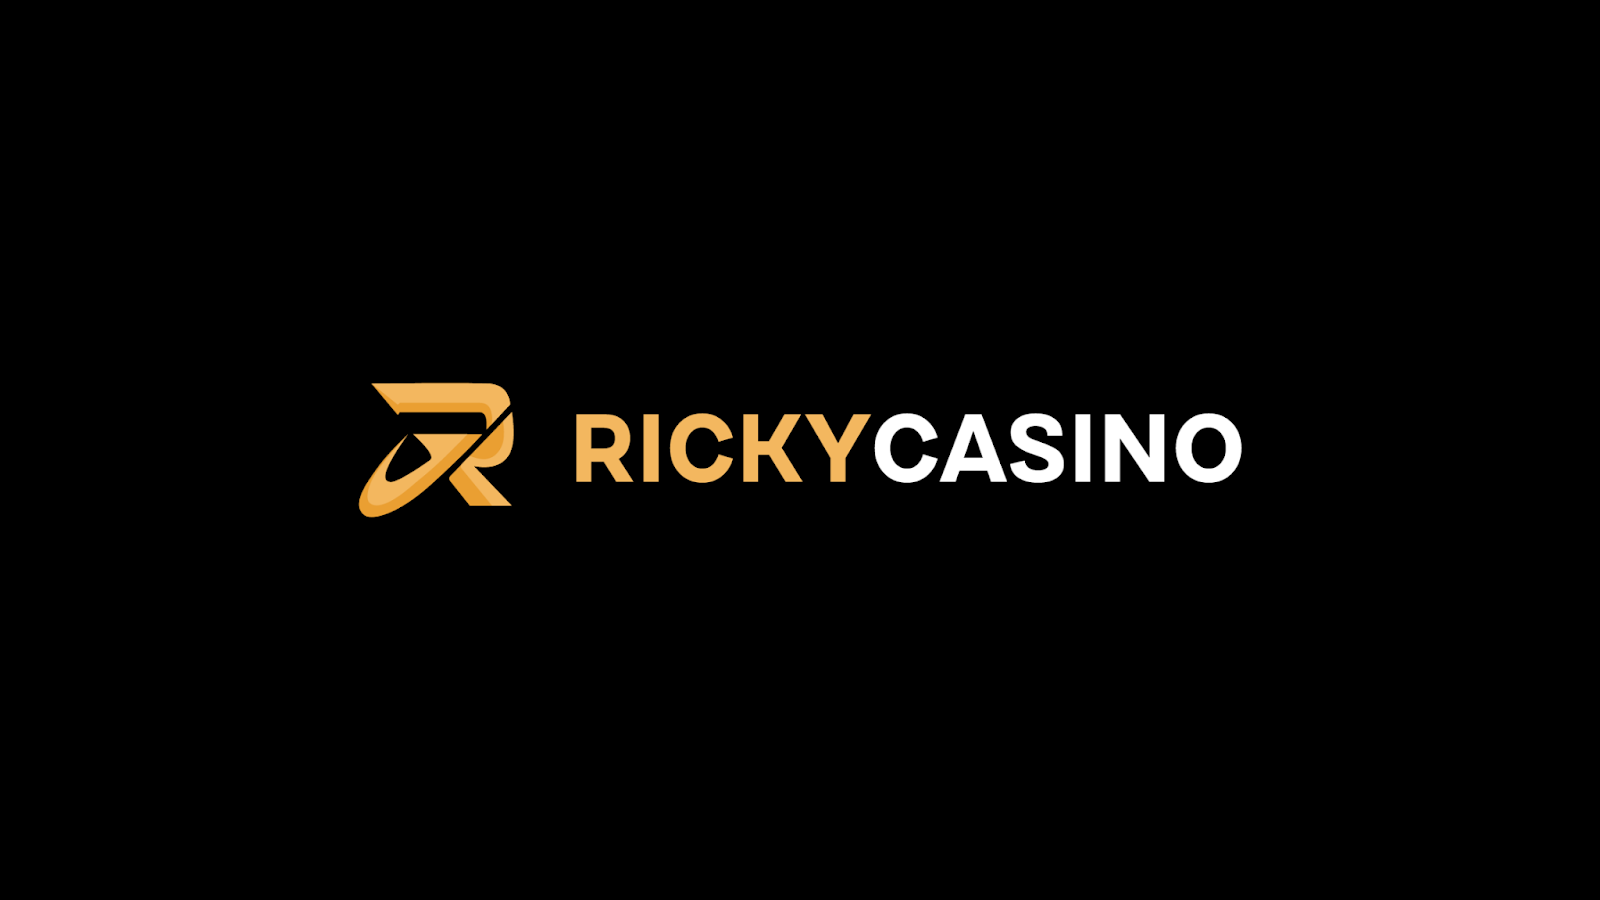 Ricky Casino Review